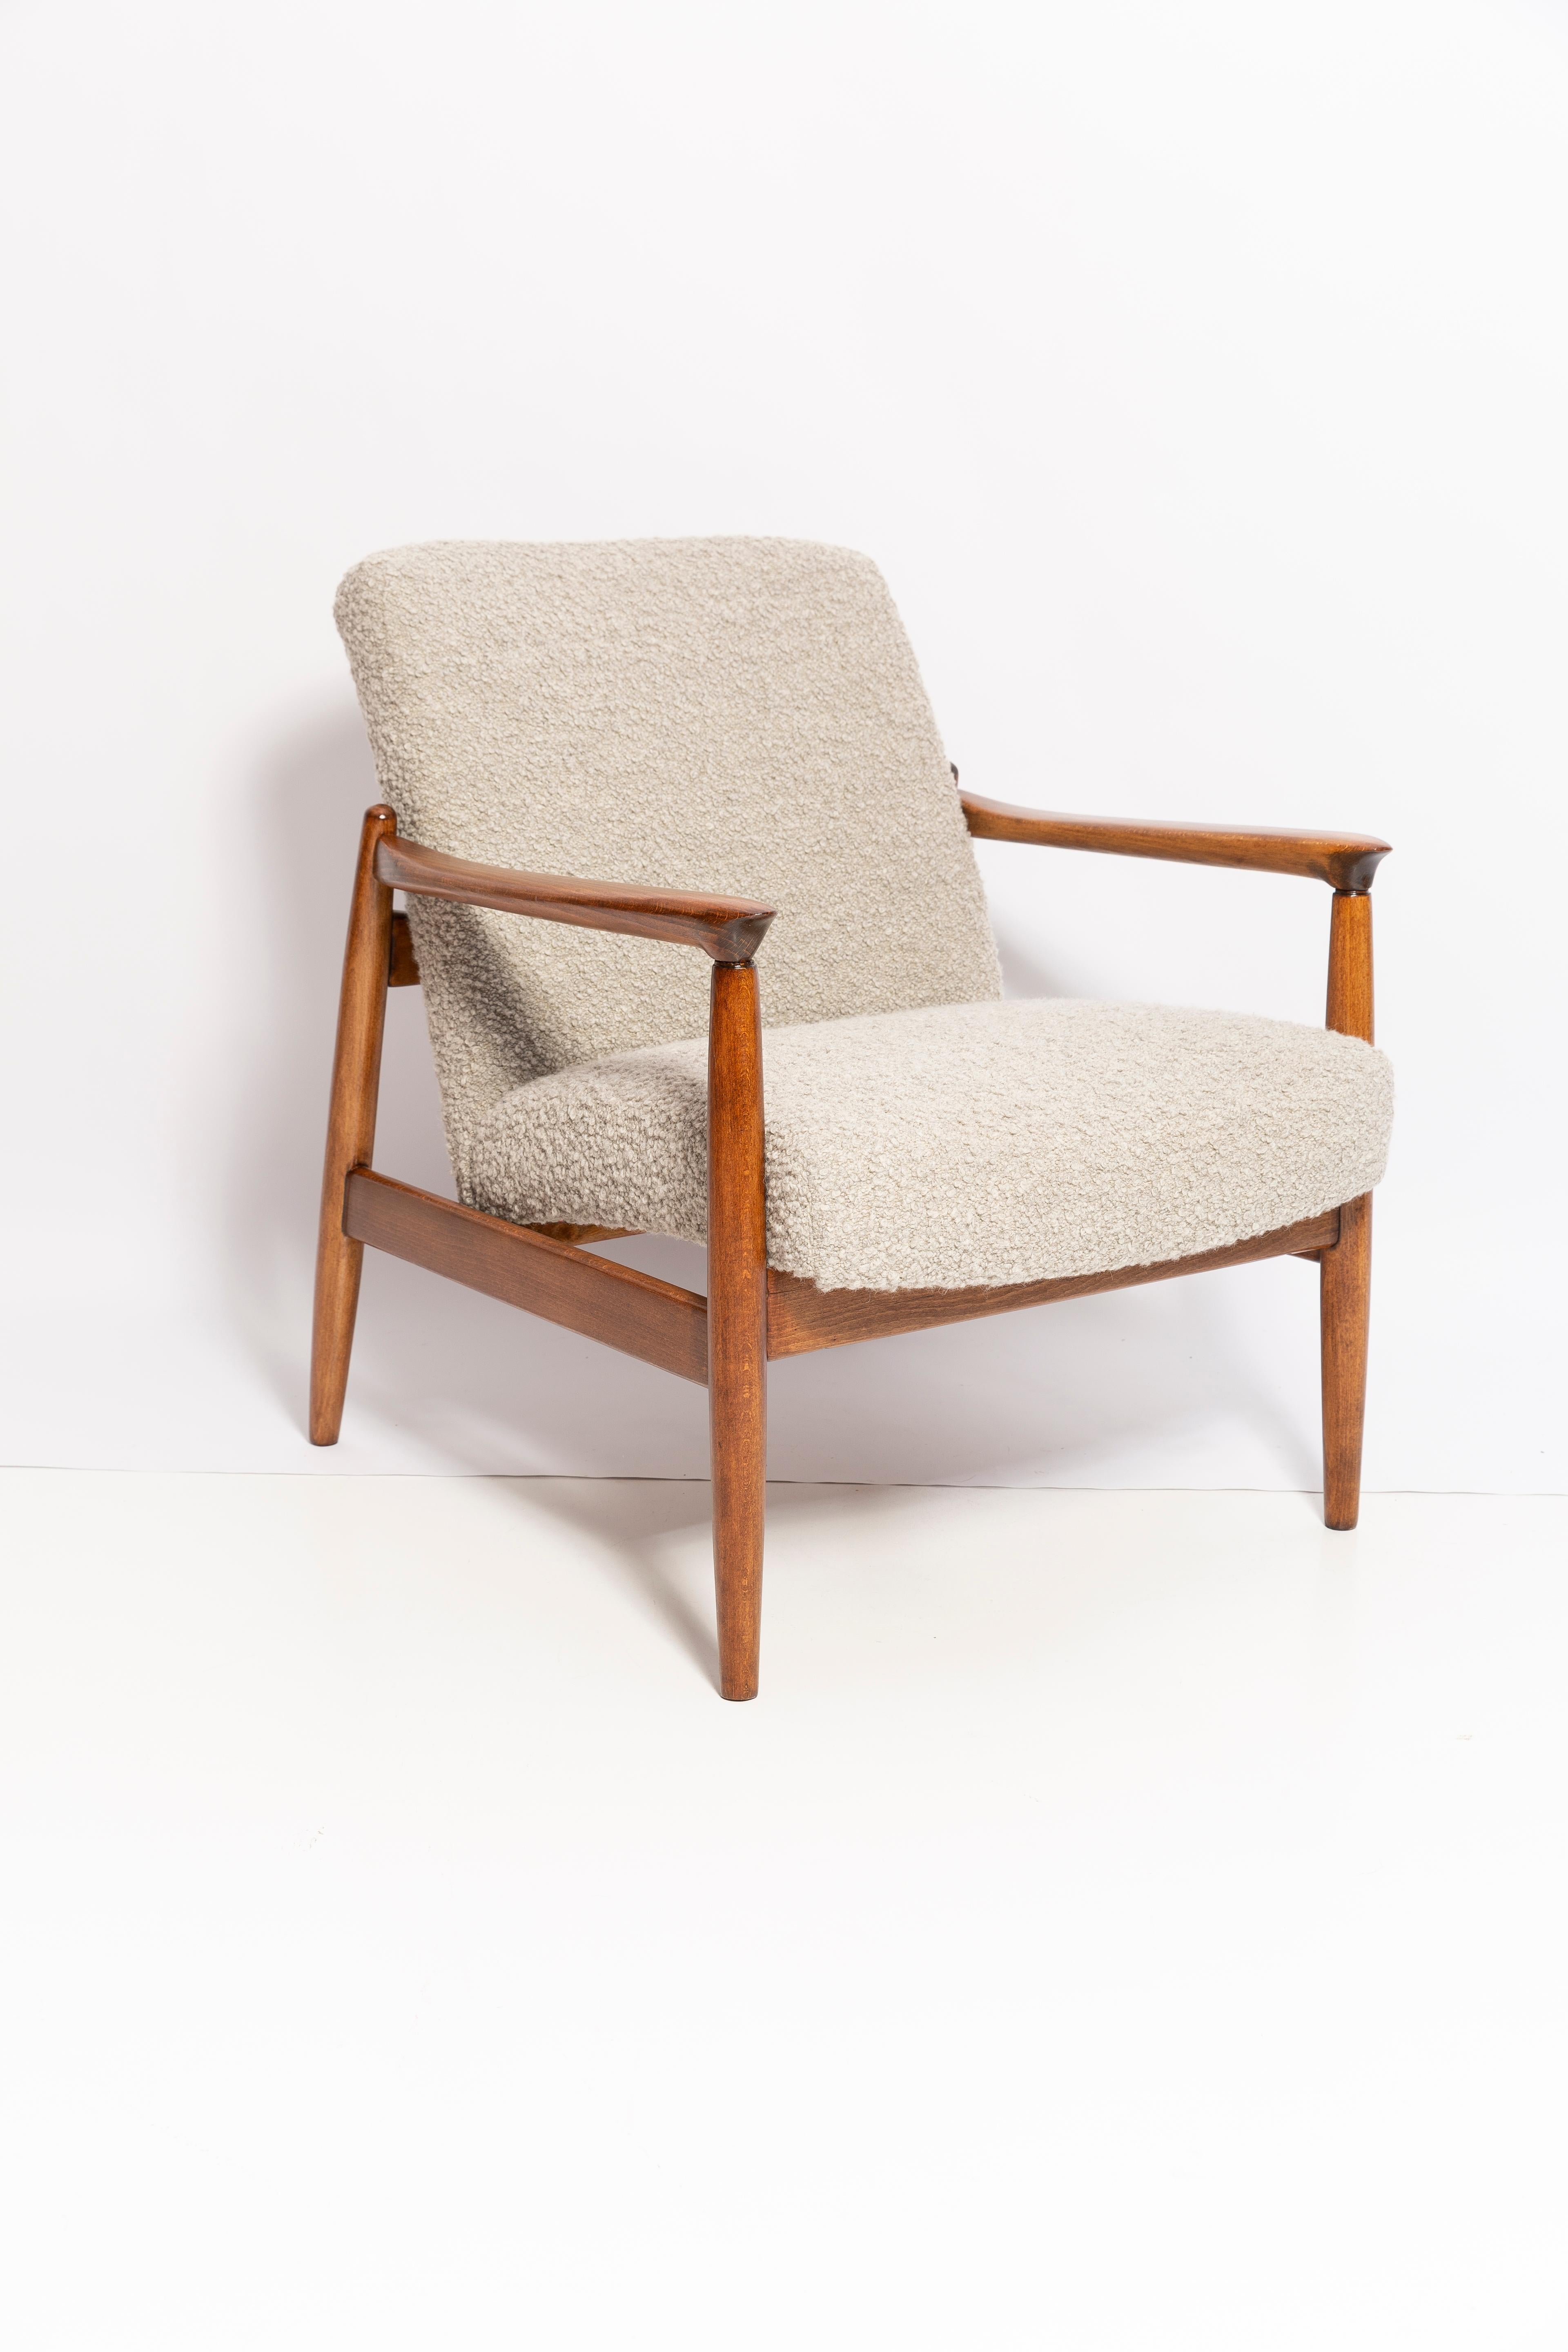 Hand-Crafted Set of Two Midcentury Gray Alpaca Wool Armchairs, Edmund Homa, Poland, 1960s For Sale